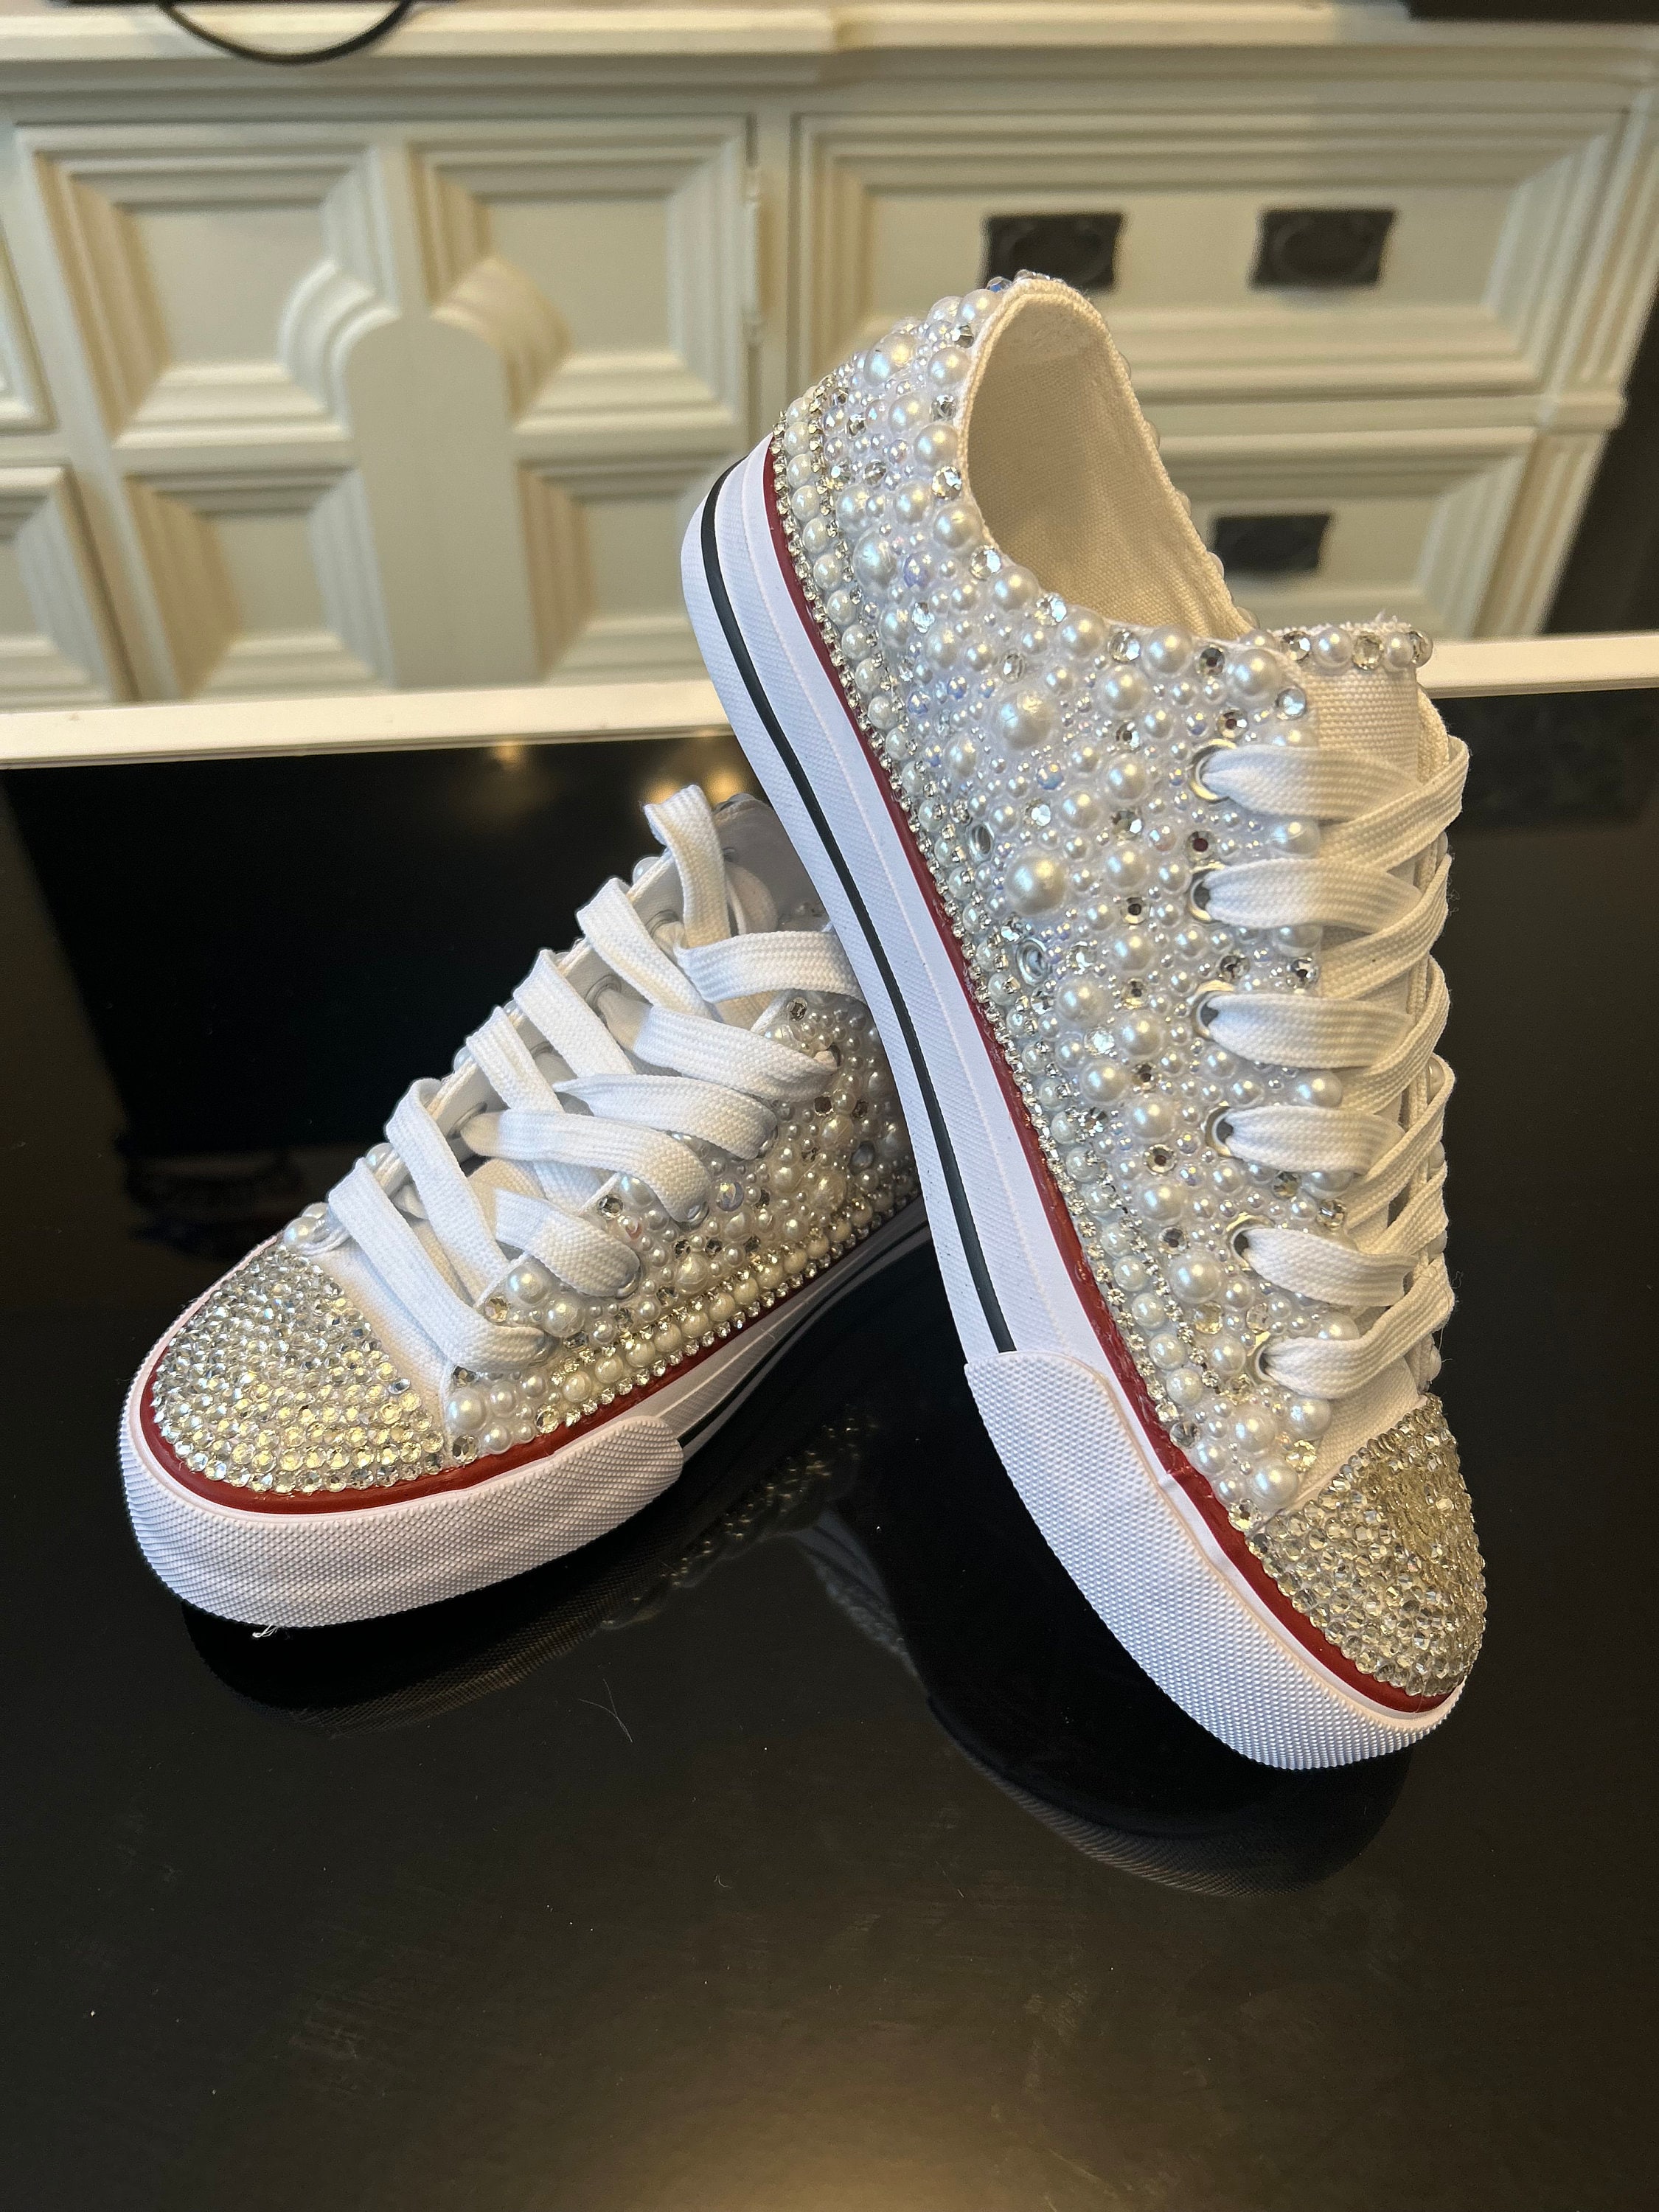 Sweet 16th Bling Sneakers Shoes, Bride Bling Shoes, Quinceañera Bling  Shoes, Adult Customized Converse Shoes, Adult Bling Shoes, Birthday 